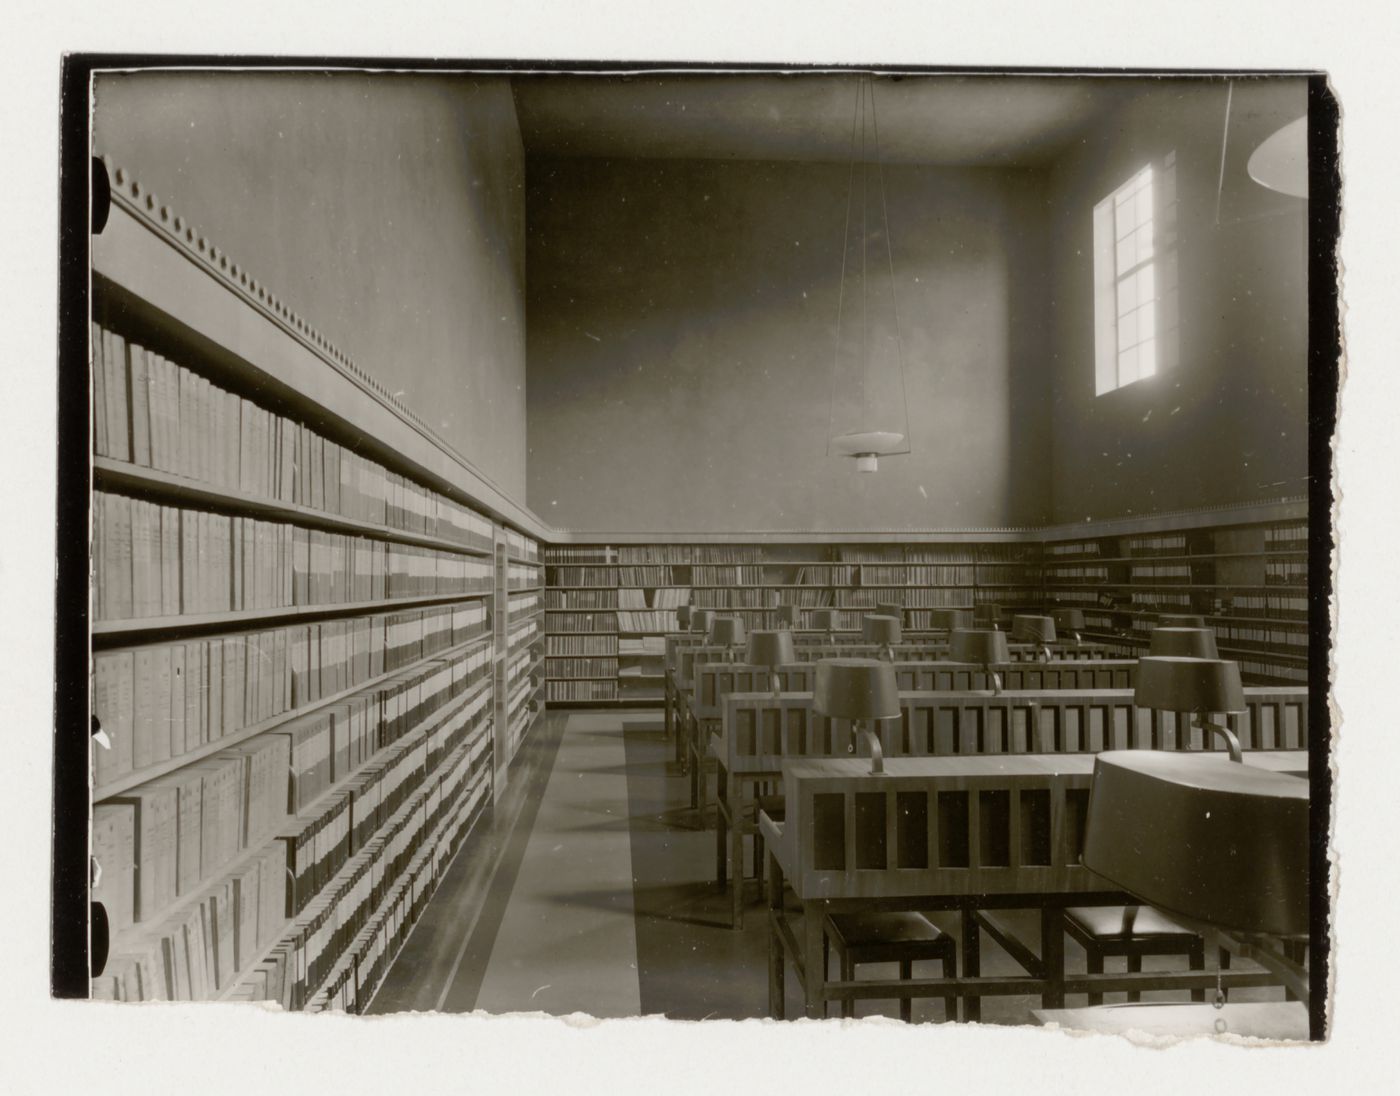 Interior view of a reading room of Stockholm Public Library showing bookshelves and carrels, 51-55 Odengatan, Stockholm